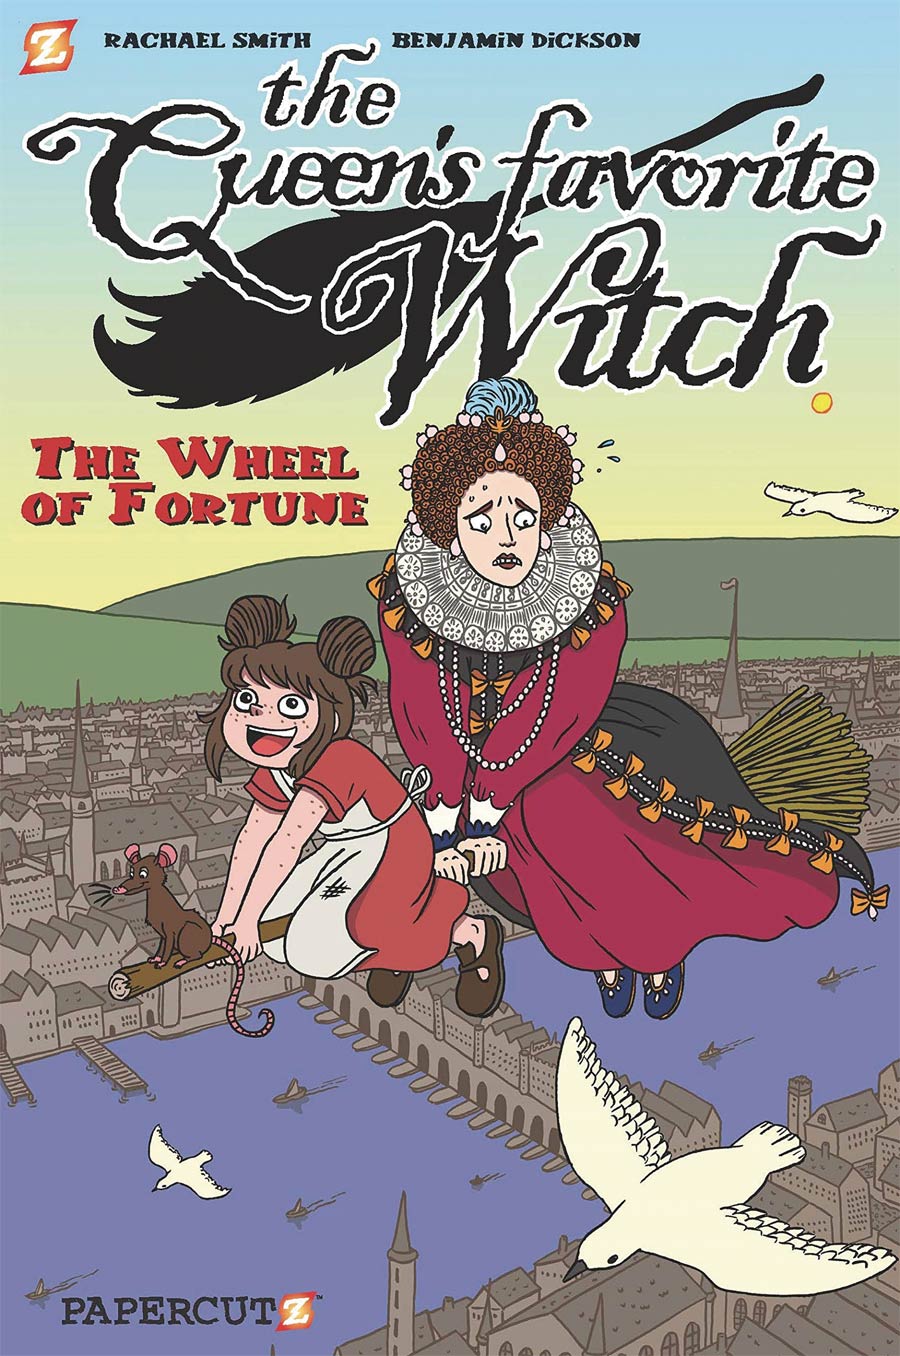 Queens Favorite Witch Vol 1 Wheel Of Fortune TP